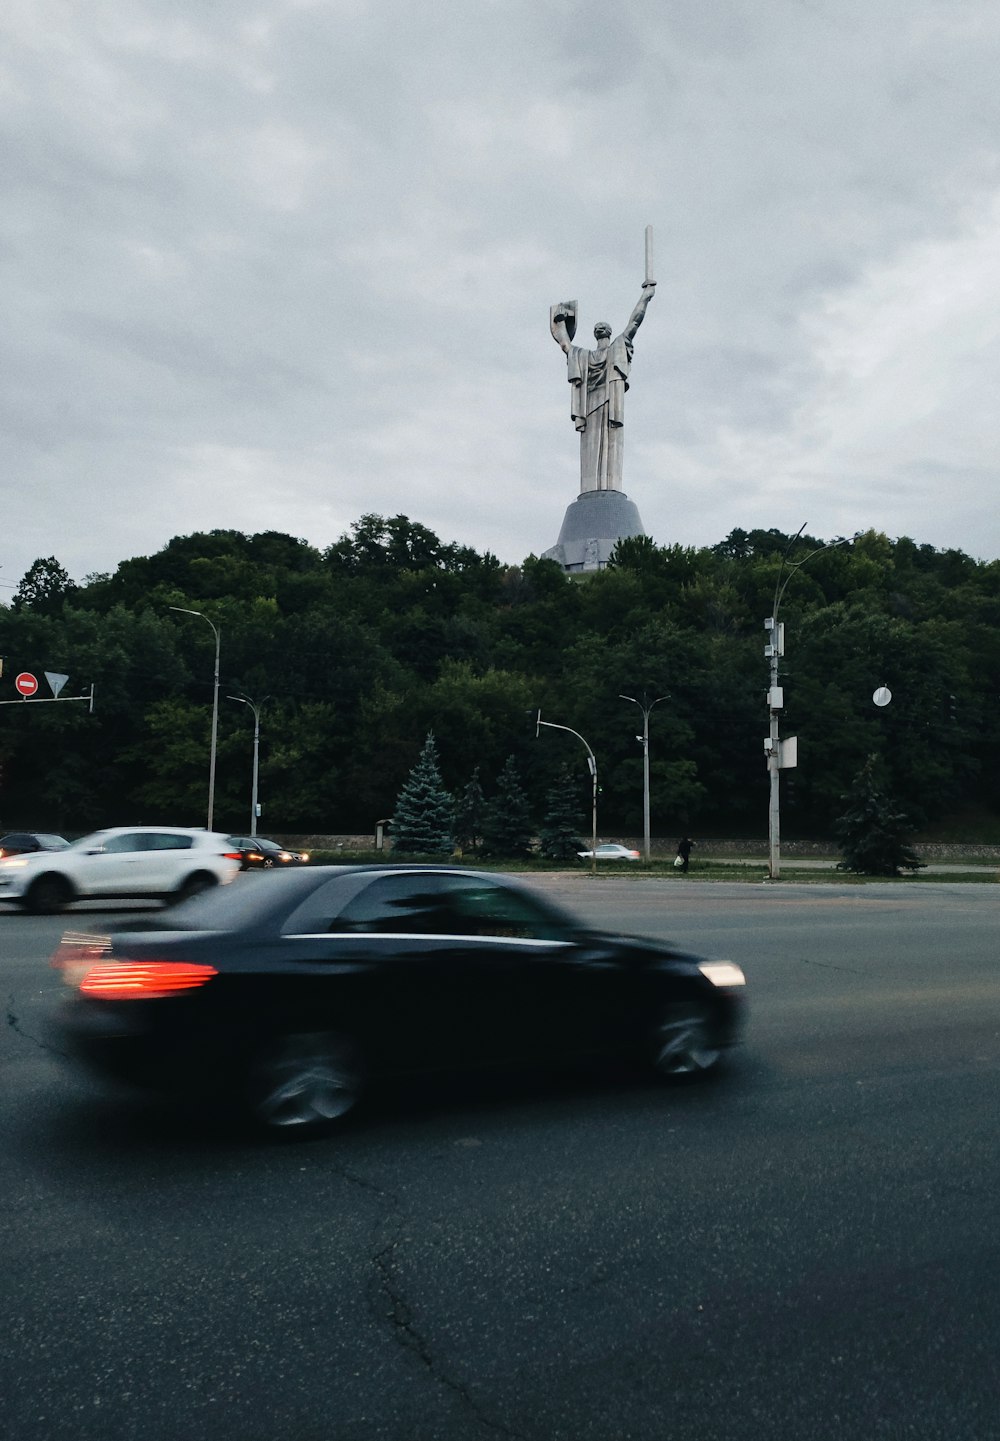 a car driving past a statue on a cloudy day